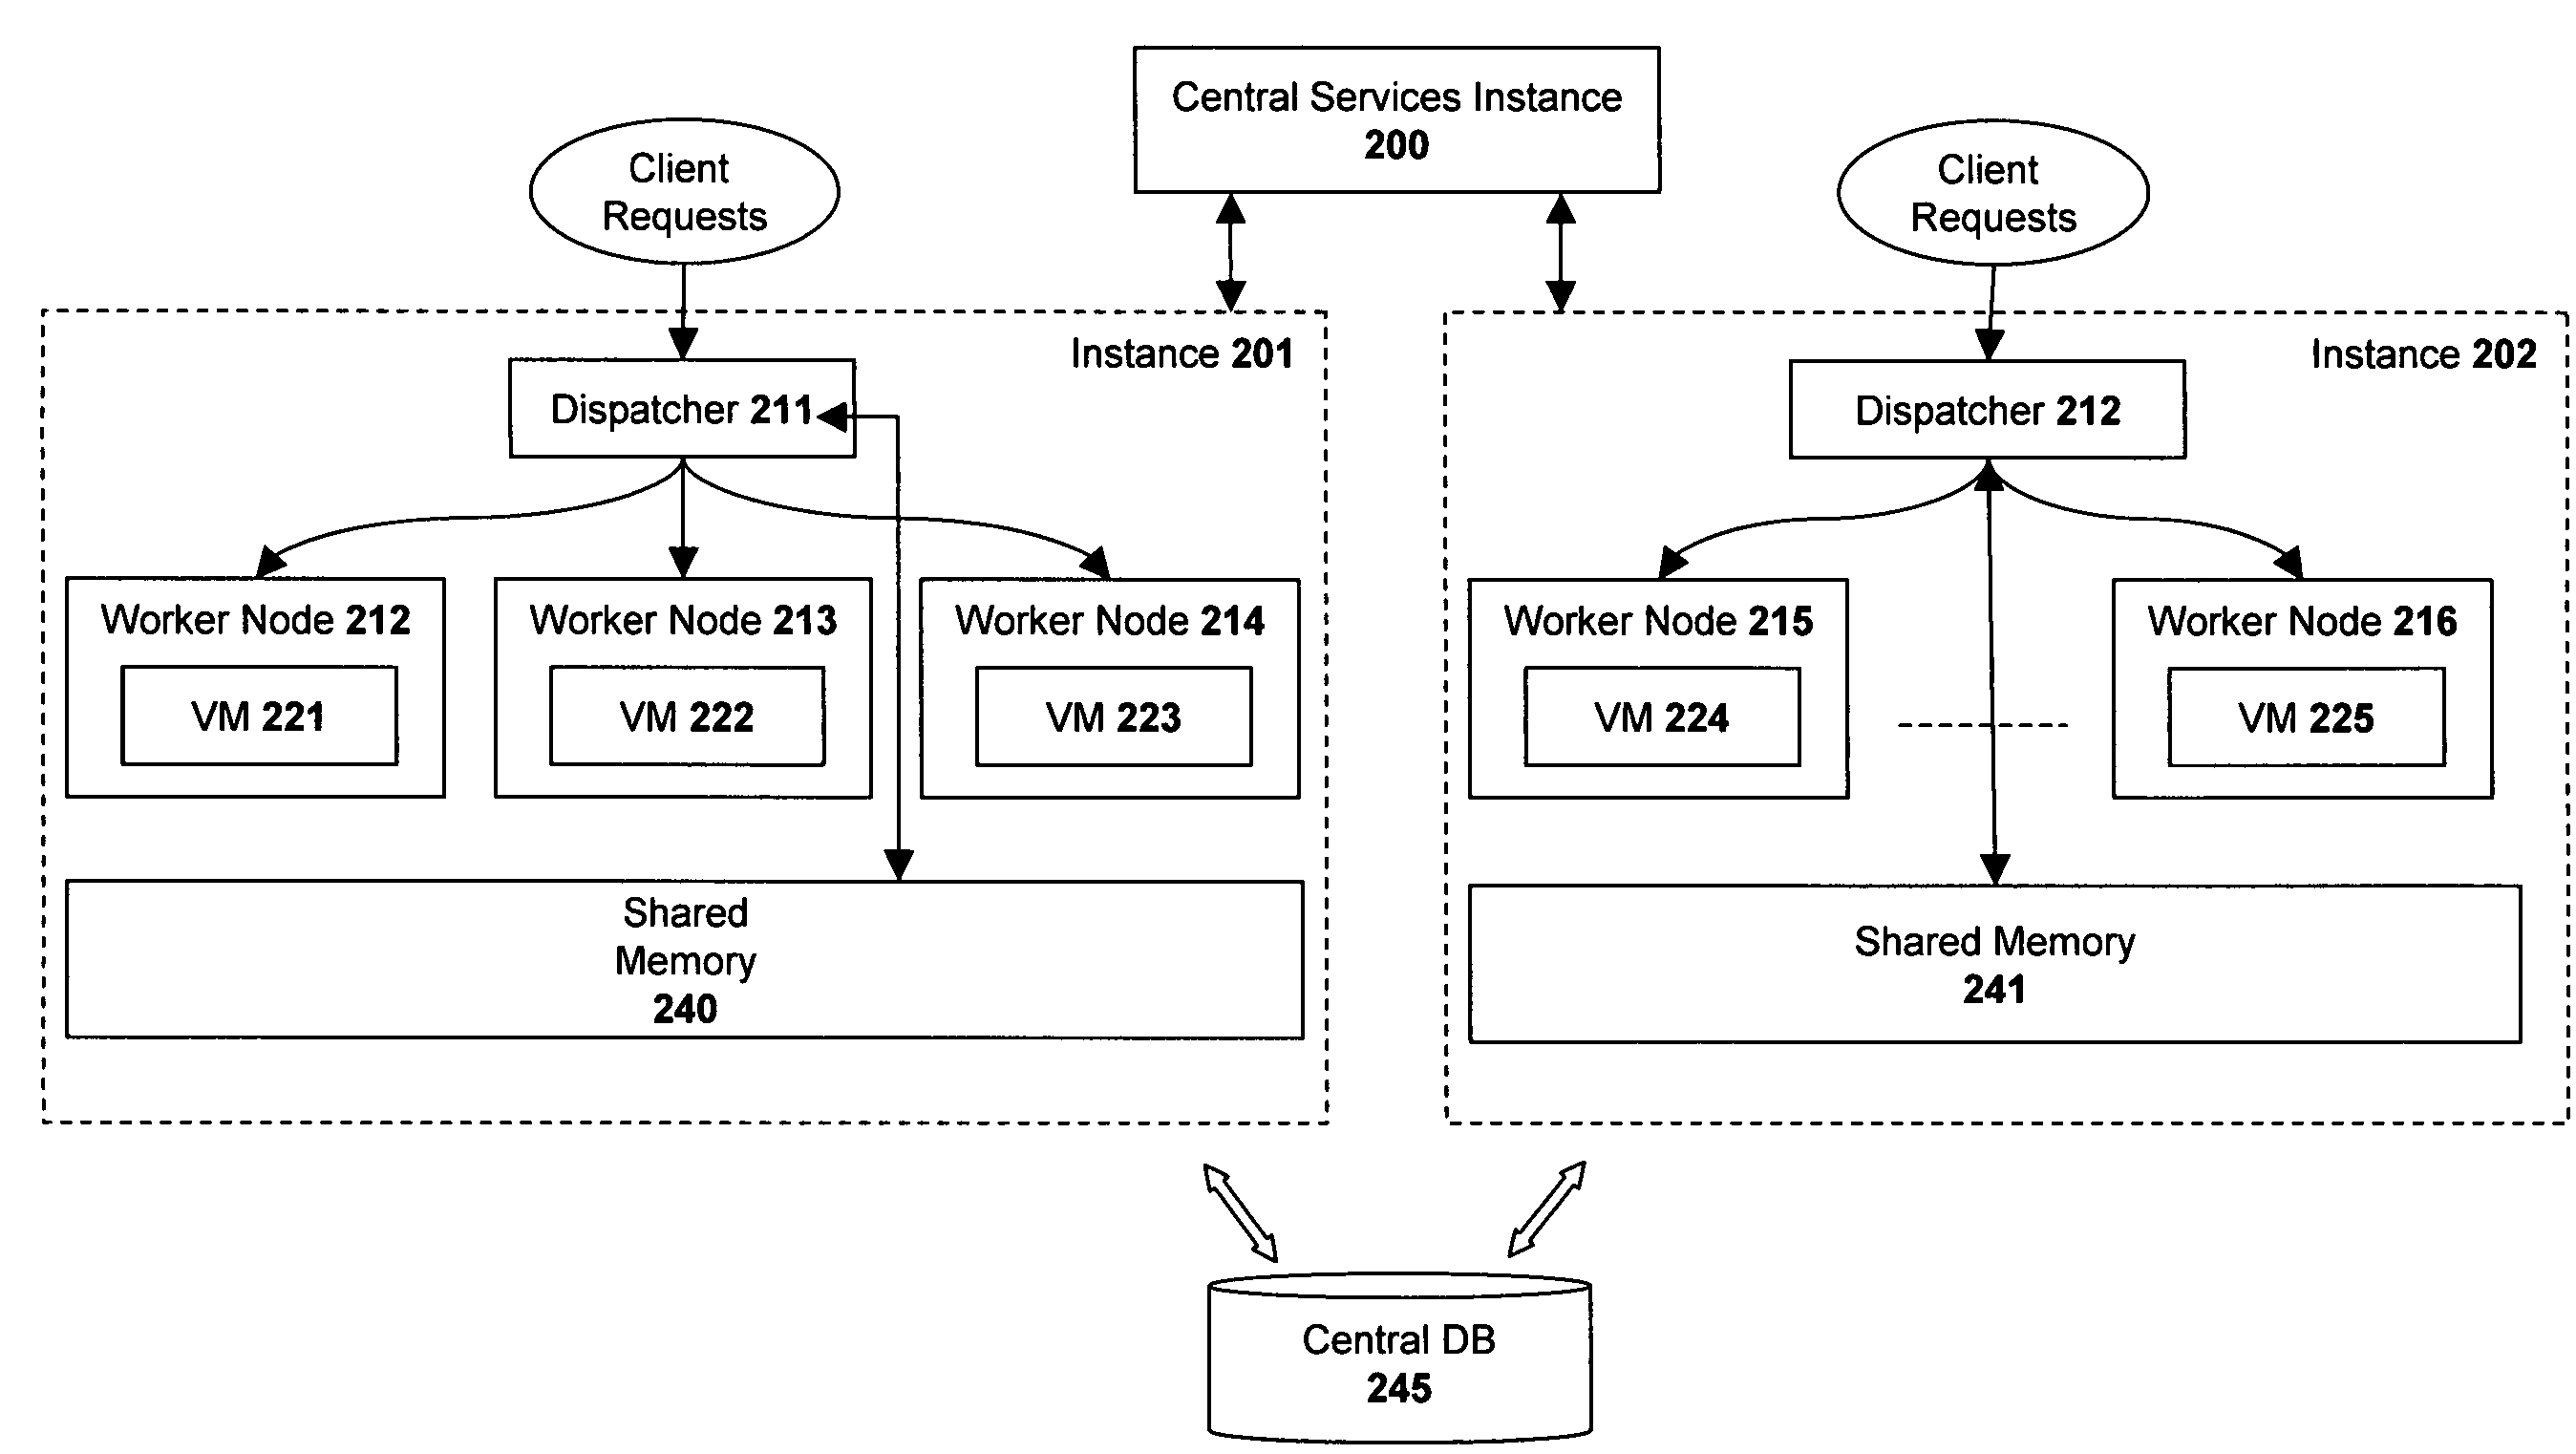 System and method for registering native libraries with non-native enterprise program code